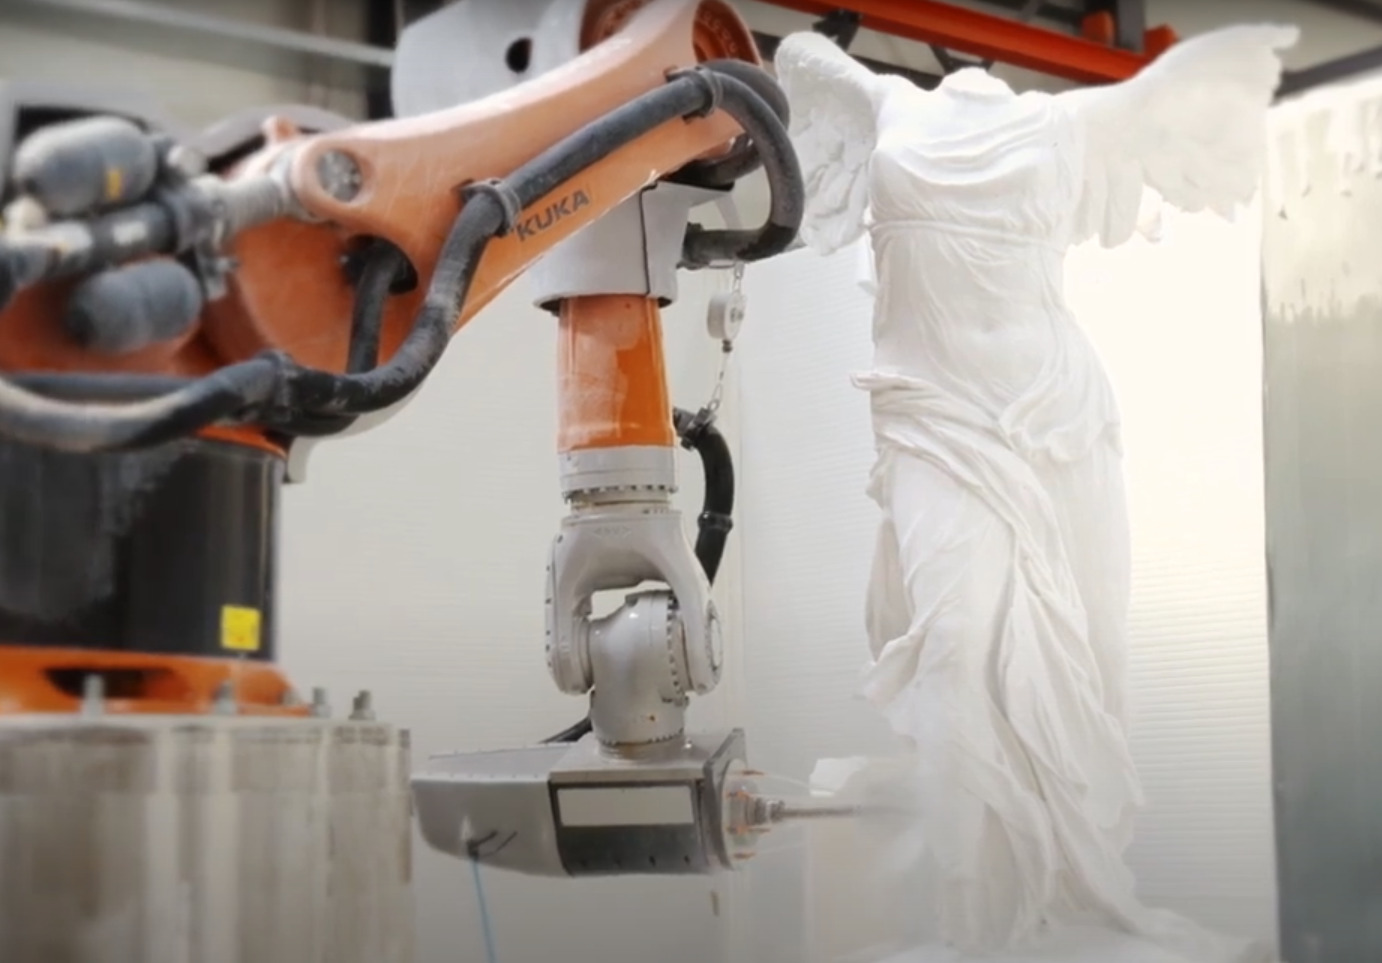 Robotic sculpting done by a KUKA robot programmed in SprutCAM X Robot CAM system